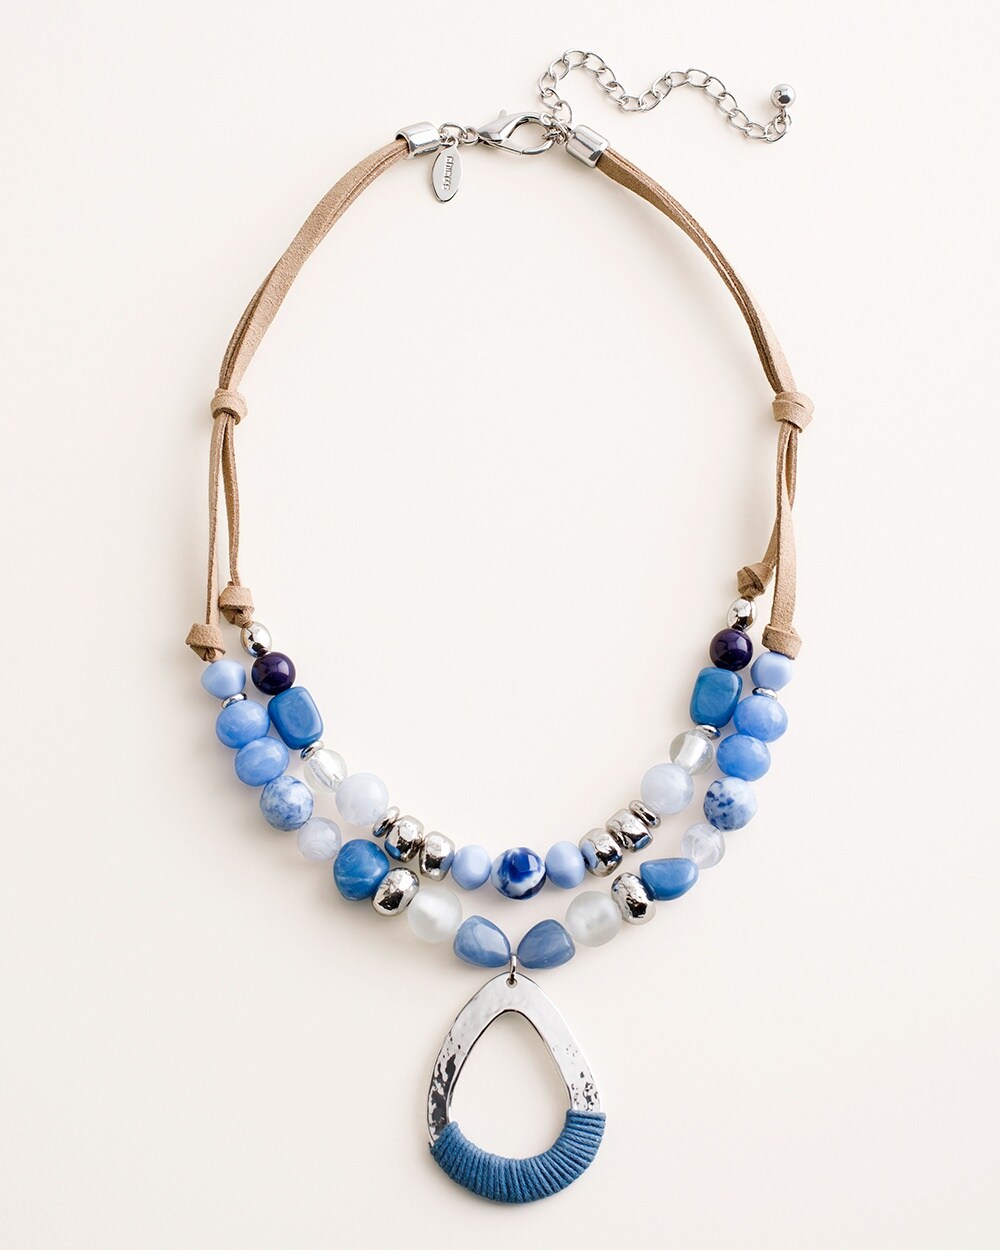 Short Blue and Silvertone Beaded Multi-Strand Necklace